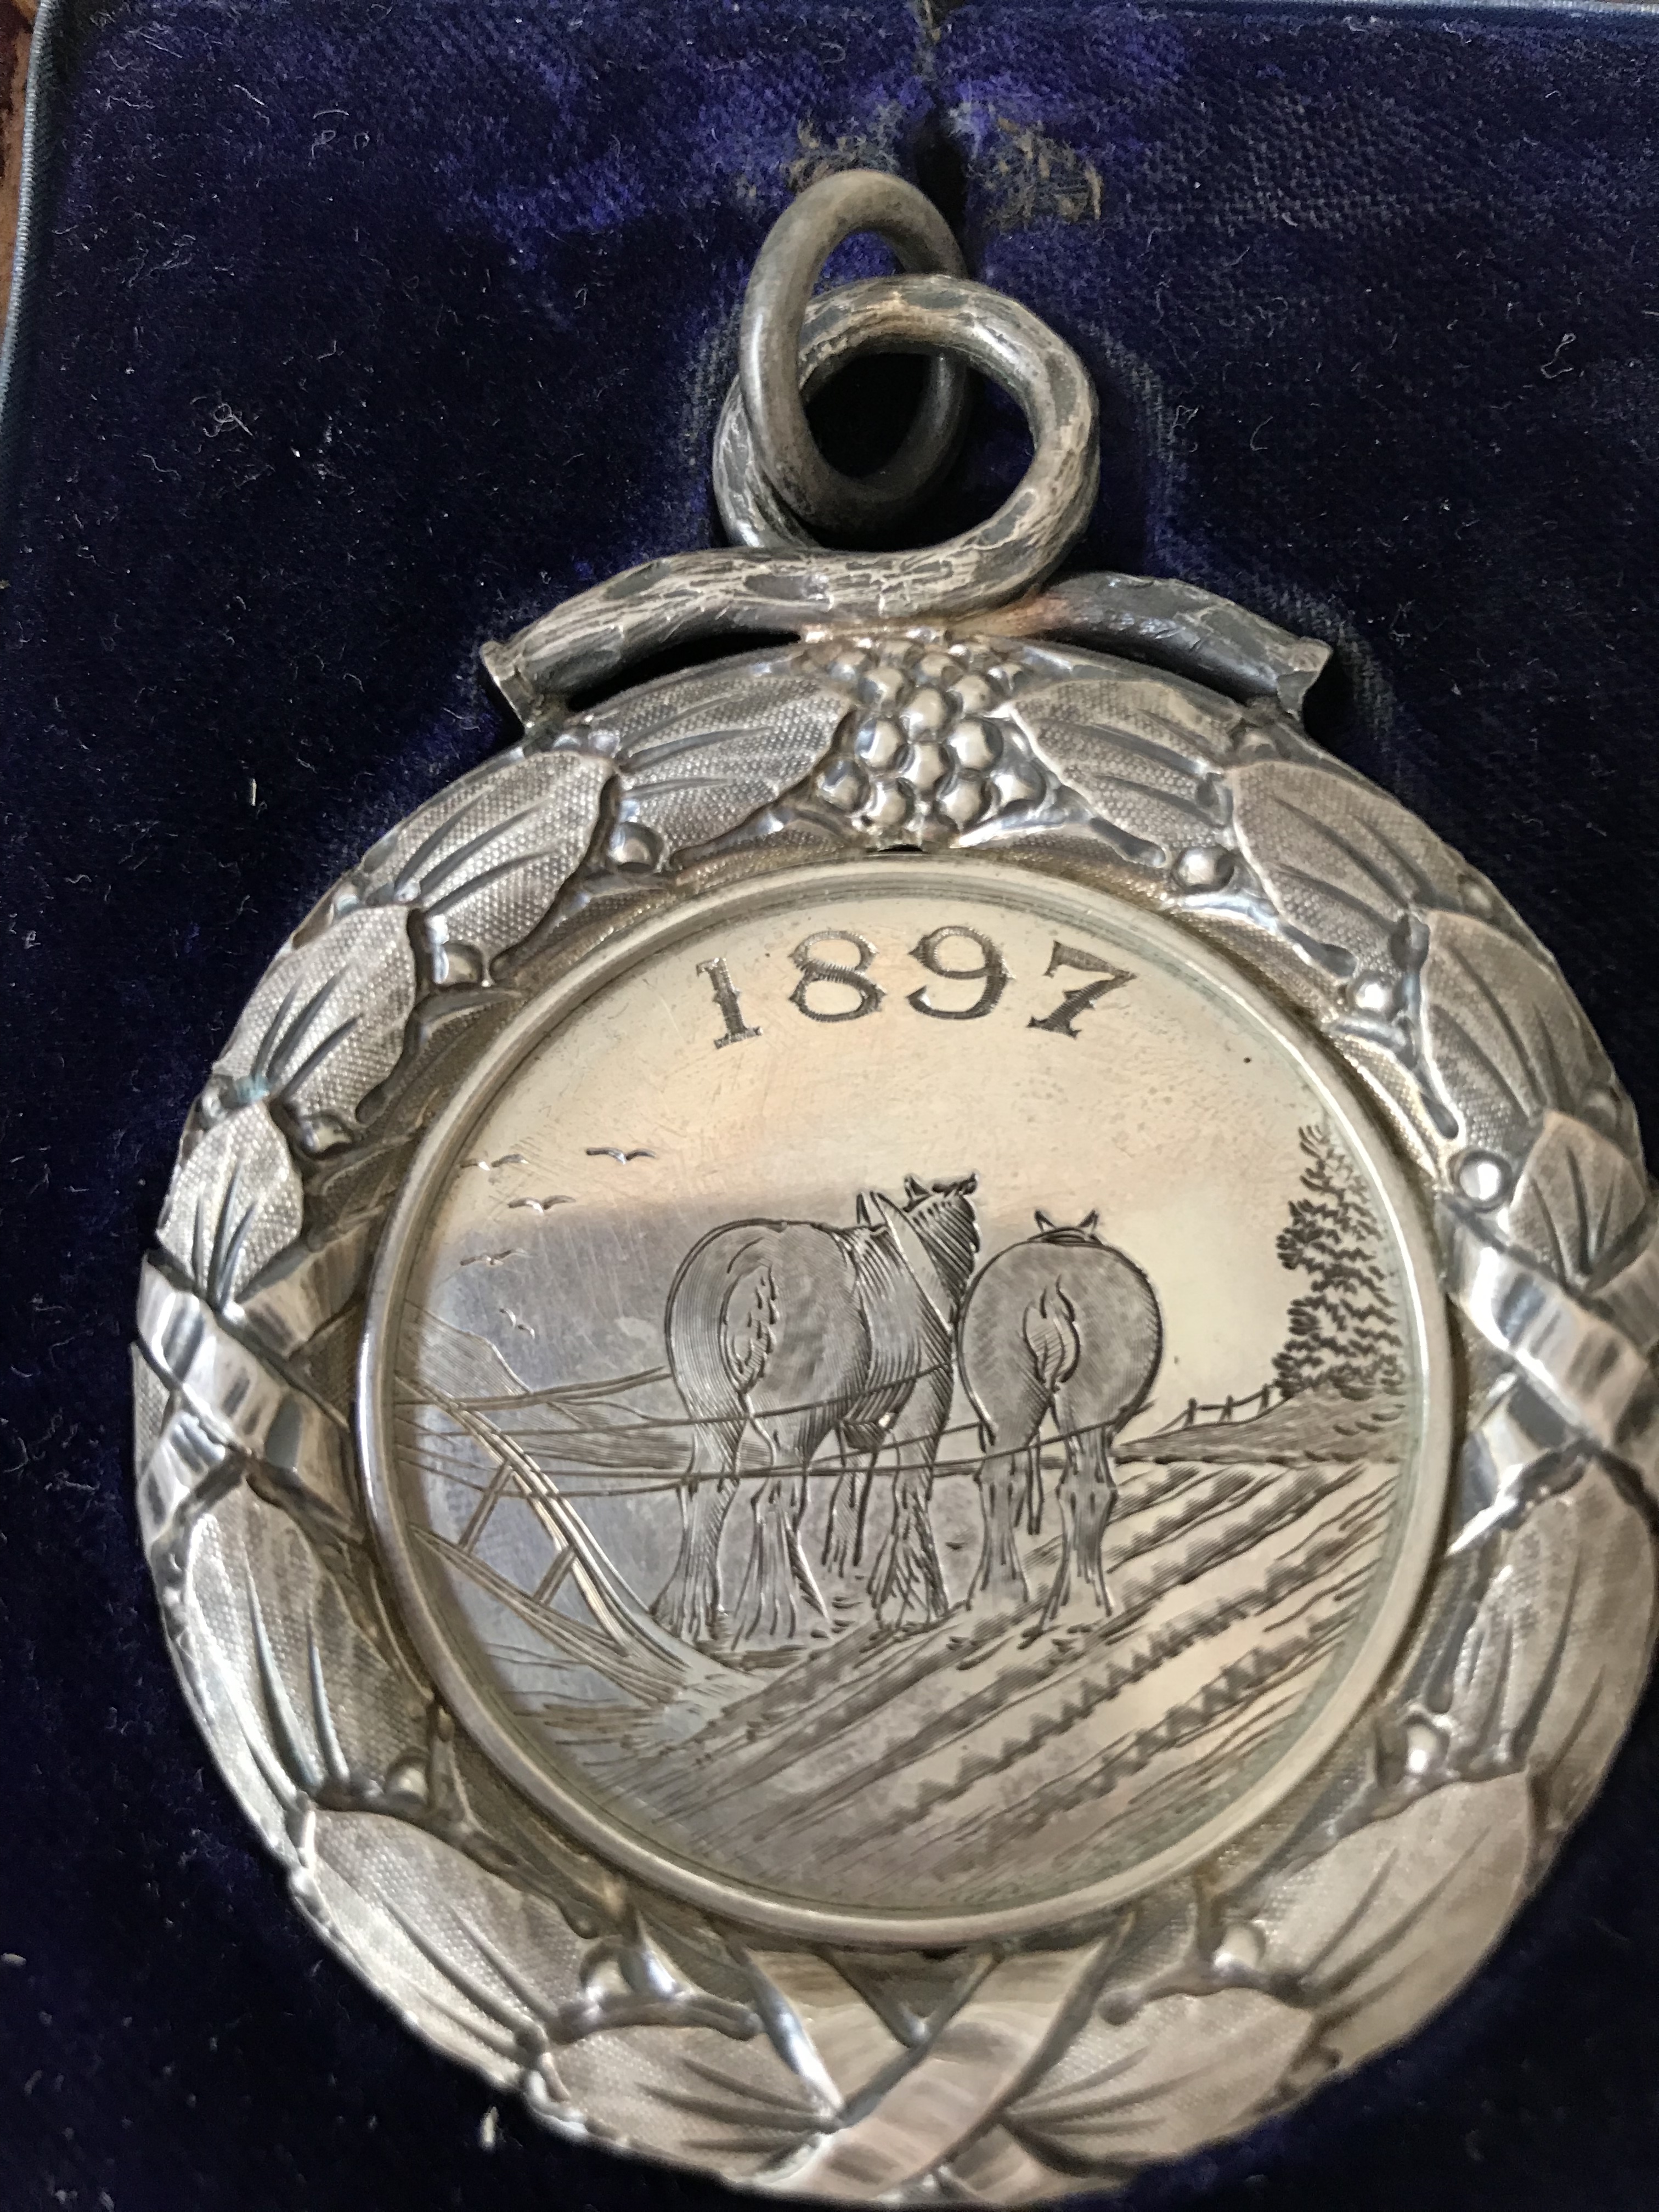 Ploughing medal, Linked To: <a href='profiles/i489.html' >John Burrell 🧬</a>